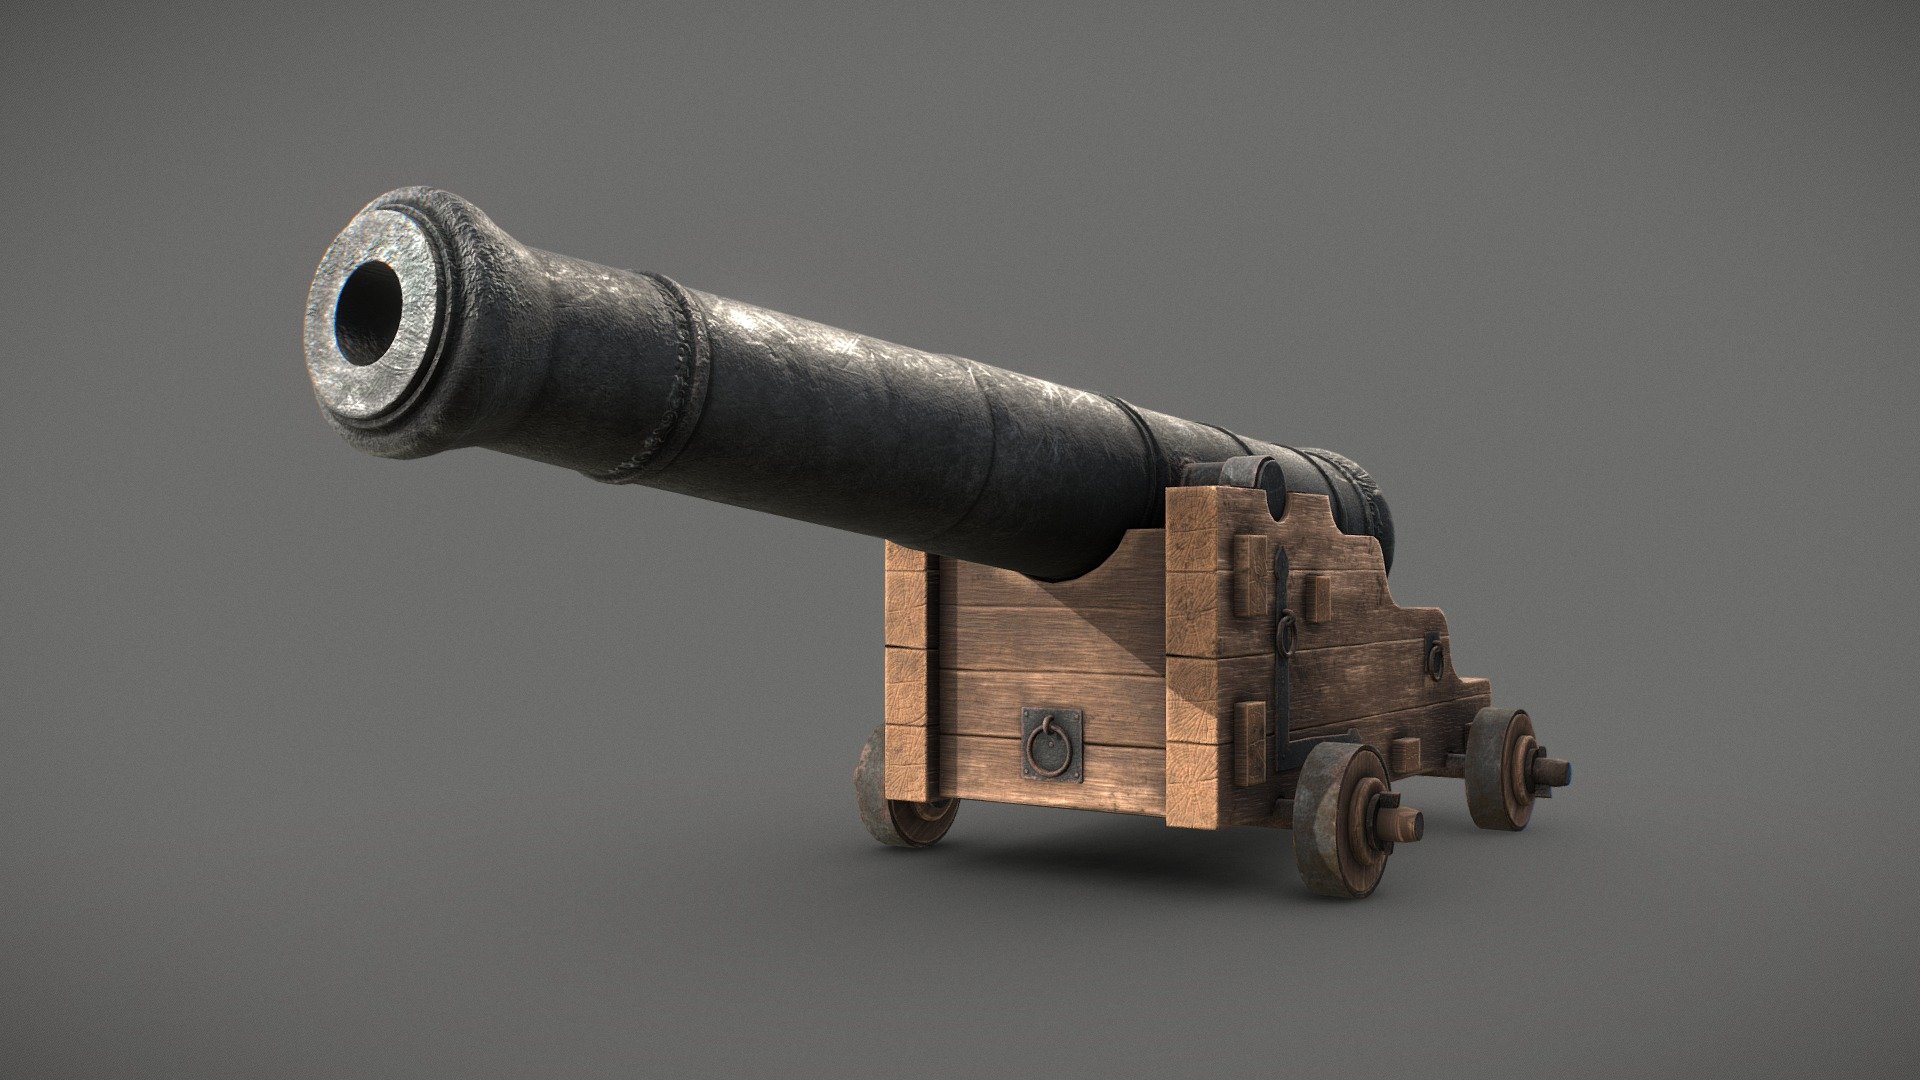 3D Low Poly game ready model of a Naval Cannon with textures included.


Created with 3ds Max 2018
Textured in Substance Painter.
Real-world scale and centered.
UnwrapUVW included.
The unit of measurement used for the model is centimeters
Polys: 4.890. Converted to triangles: 9.686

Maps sizes: 4096x4096.
Provided Maps:
- Albedo
- Normal
- Roughness
- Metalness
- AO

Formats included: FBX / OBJ / 3DS

This model can be used for any game, film, personal project, etc. You may not resell or redistribute any content - Old Naval Cannon - Low Poly - Buy Royalty Free 3D model by MSWoodvine 3d model